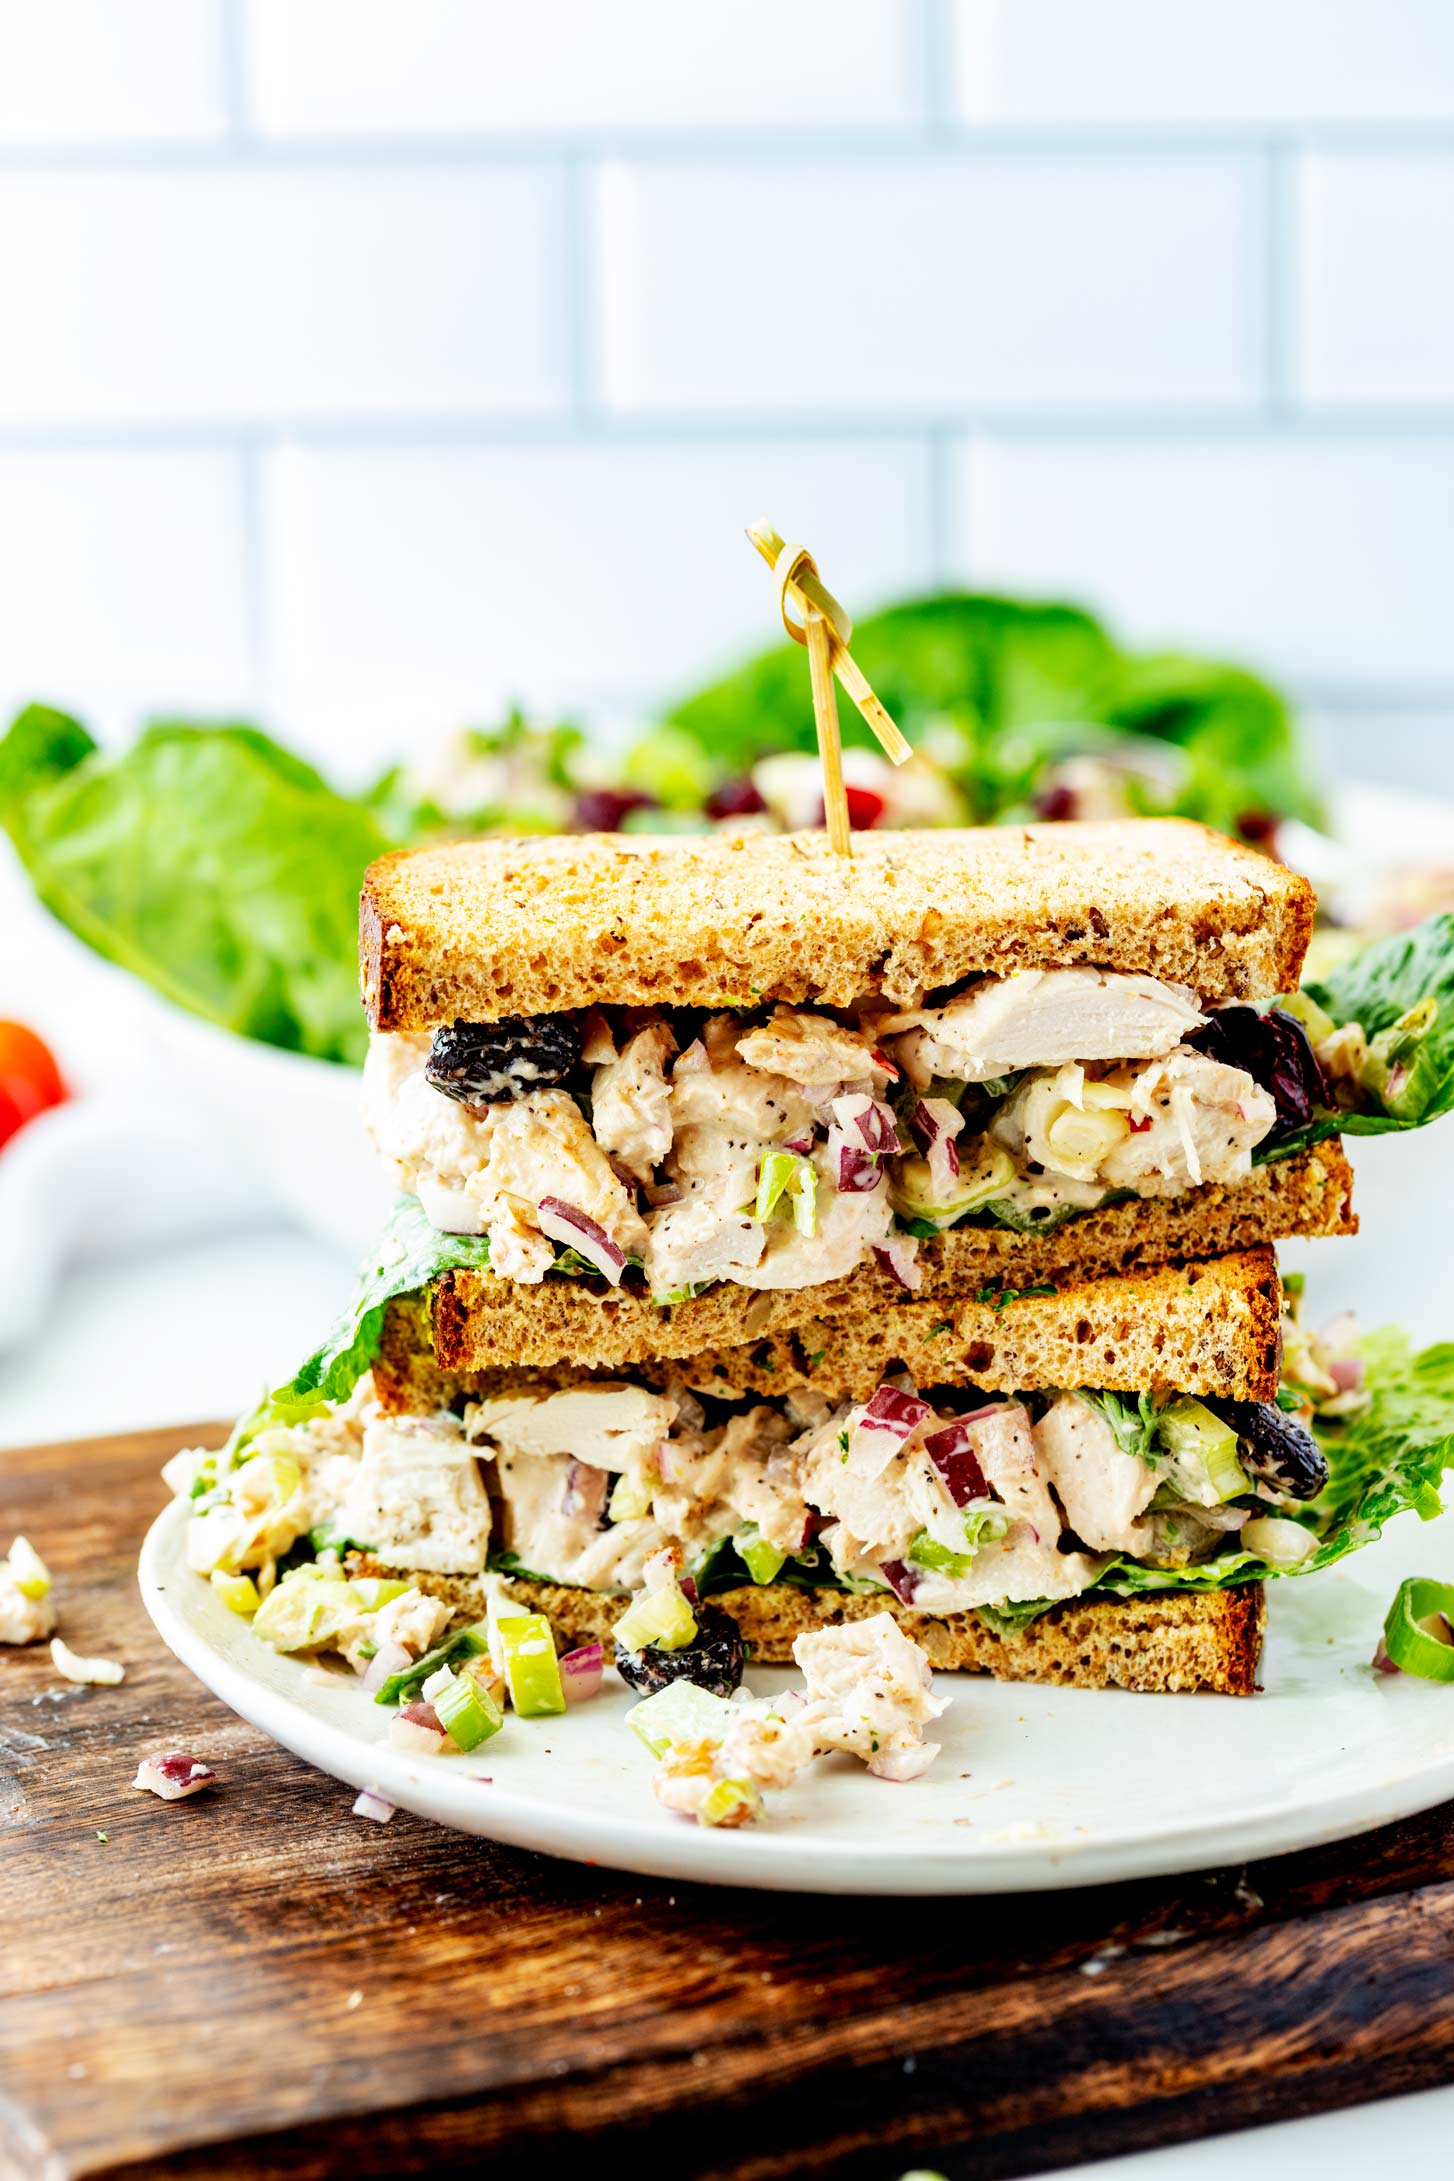 A turkey salad sandwich cut in half and stacked.